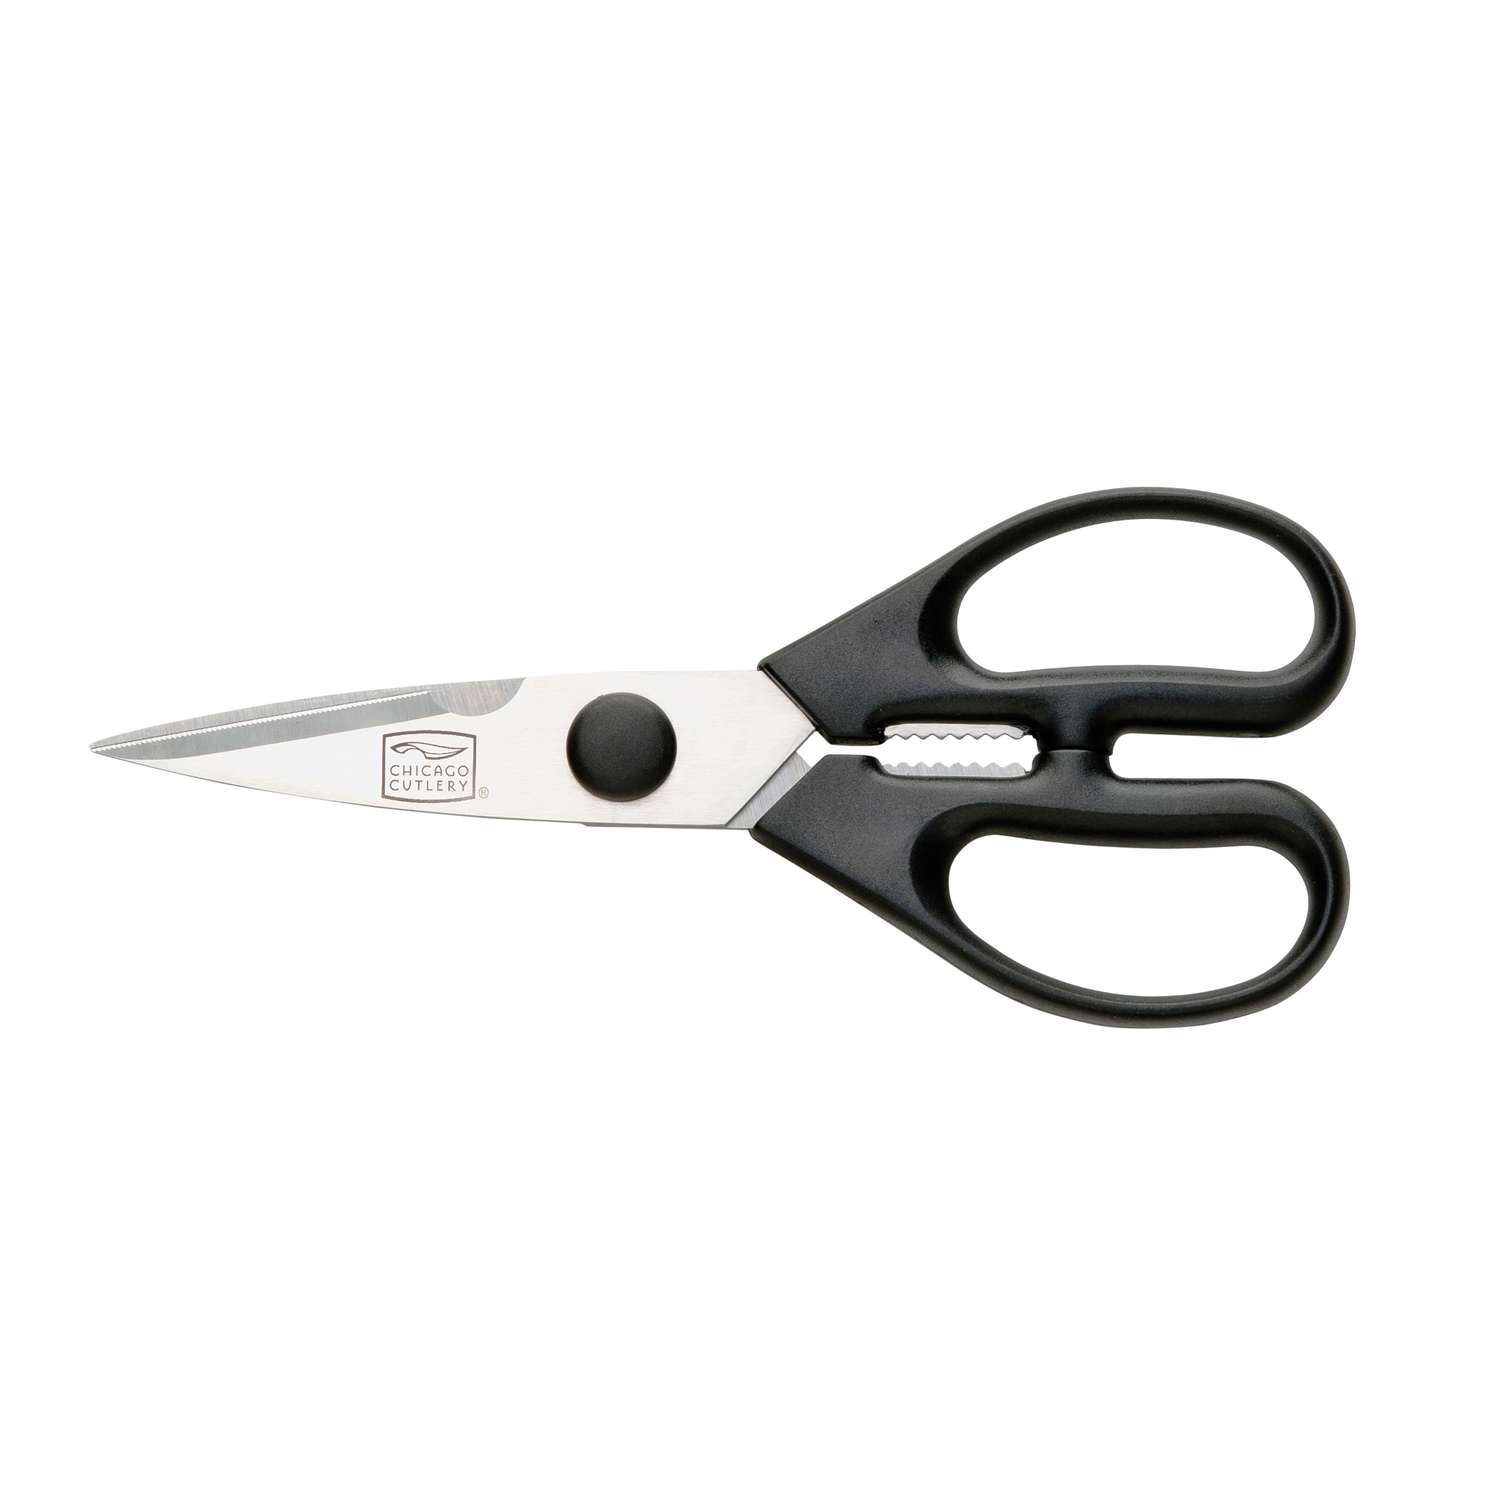 Chicago Cutlery Stainless Steel Kitchen Scissors 1 pc - Ace Hardware